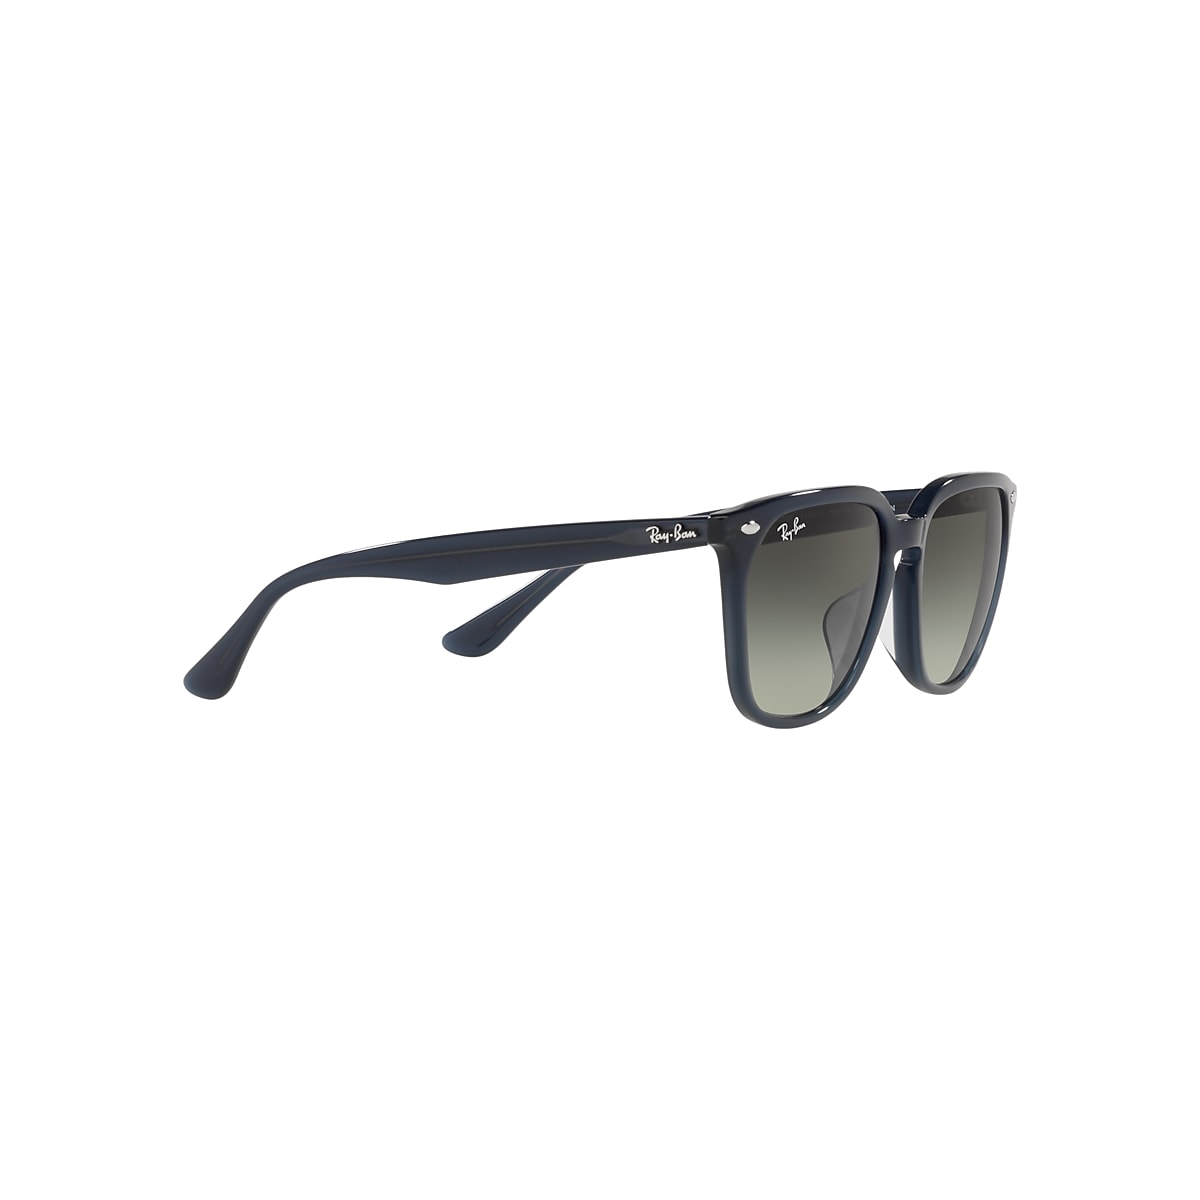 RB4362 Sunglasses in Dark Blue and Grey - RB4362F | Ray-Ban® US